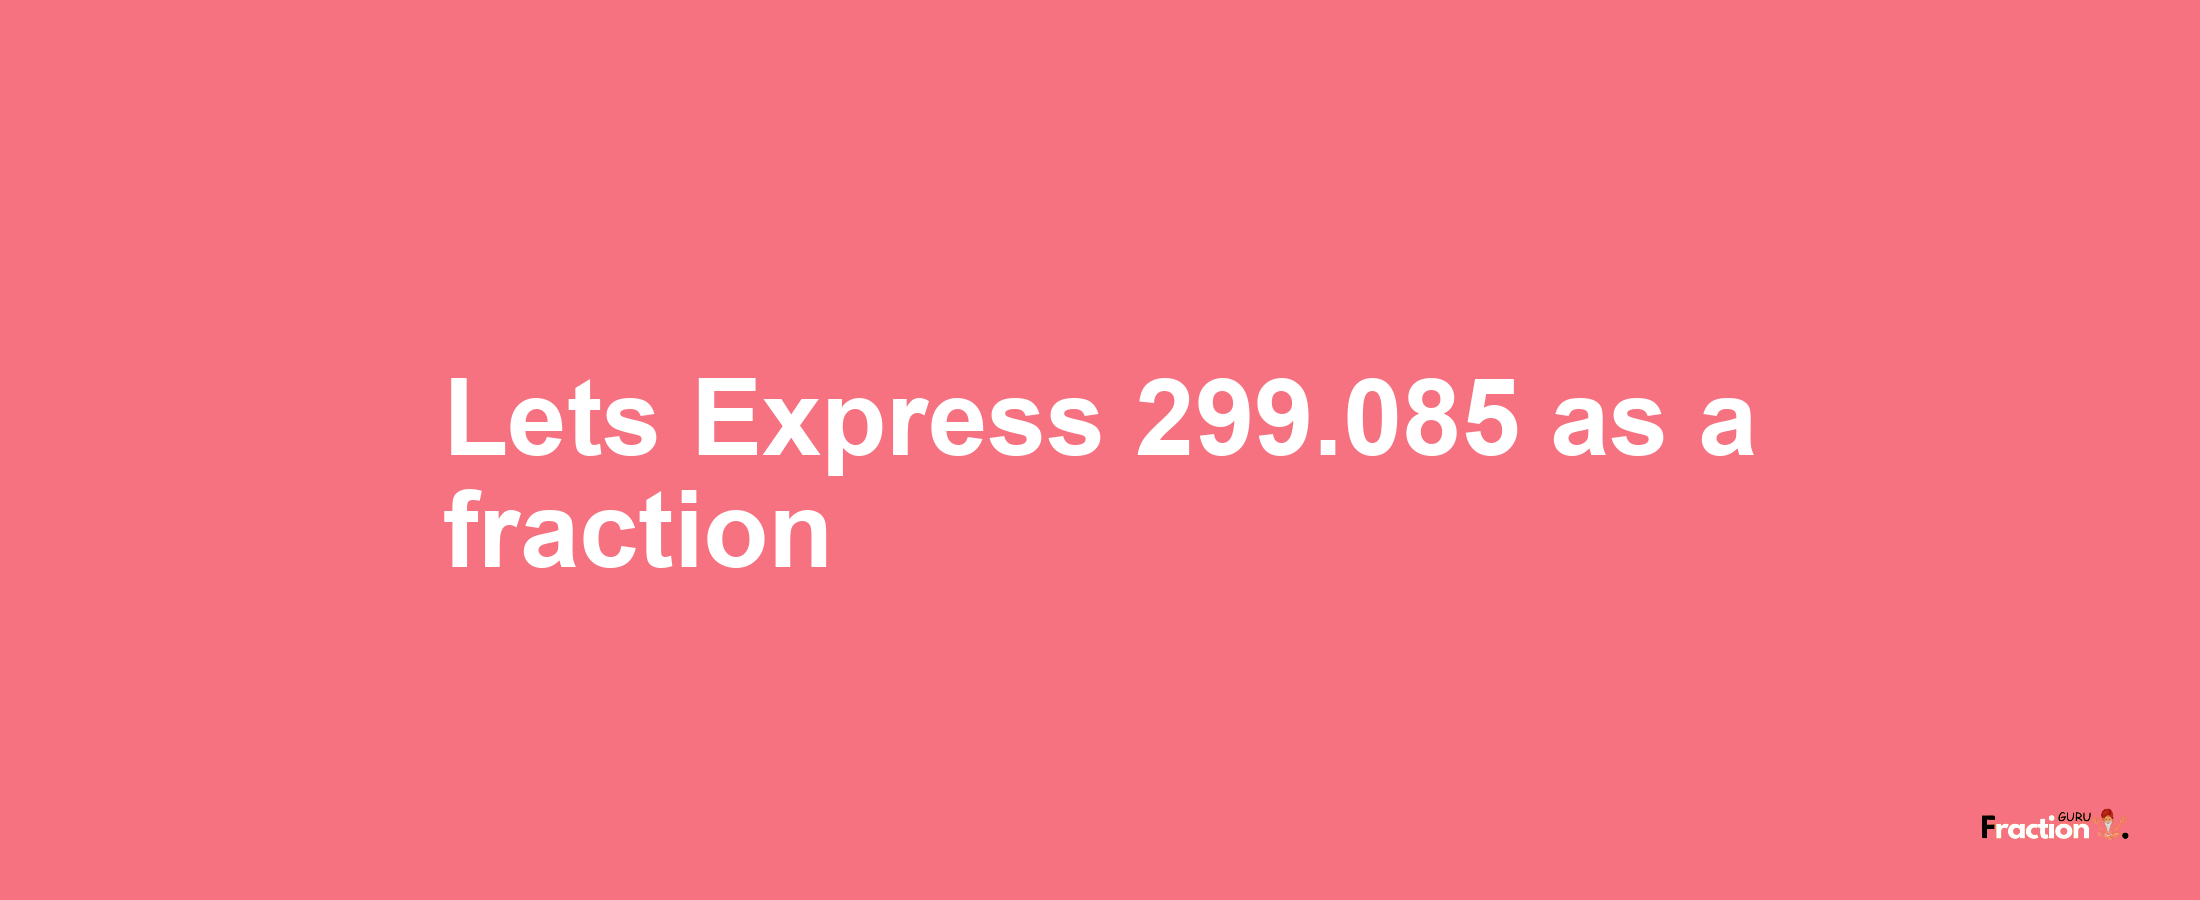 Lets Express 299.085 as afraction